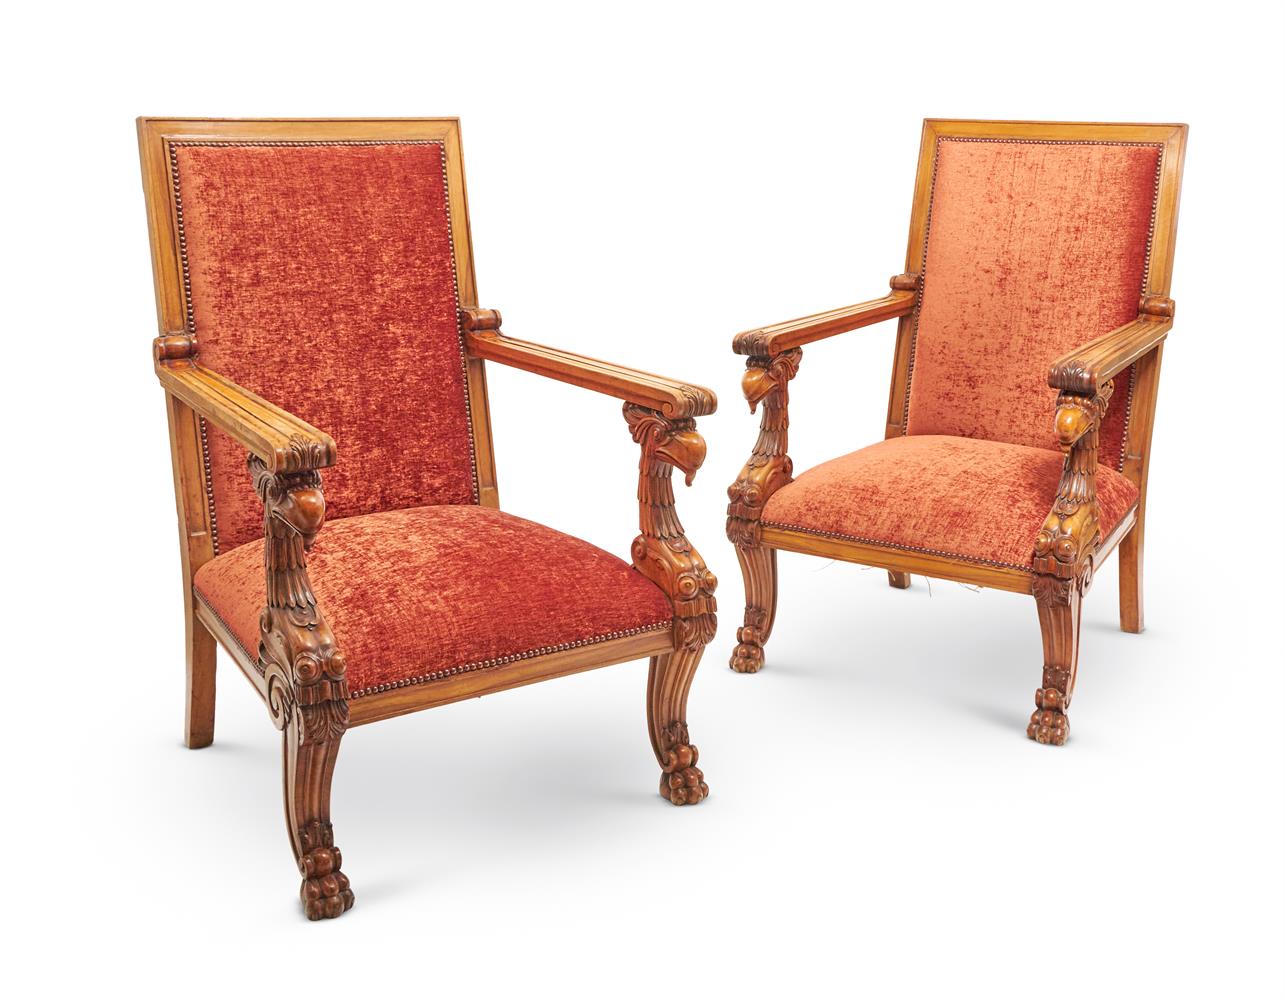 A PAIR OF MAHOGANY AND PIERRE FRAY VELOUR UPHOLSTERED ARMCHAIRS, MID 19TH CENTURY